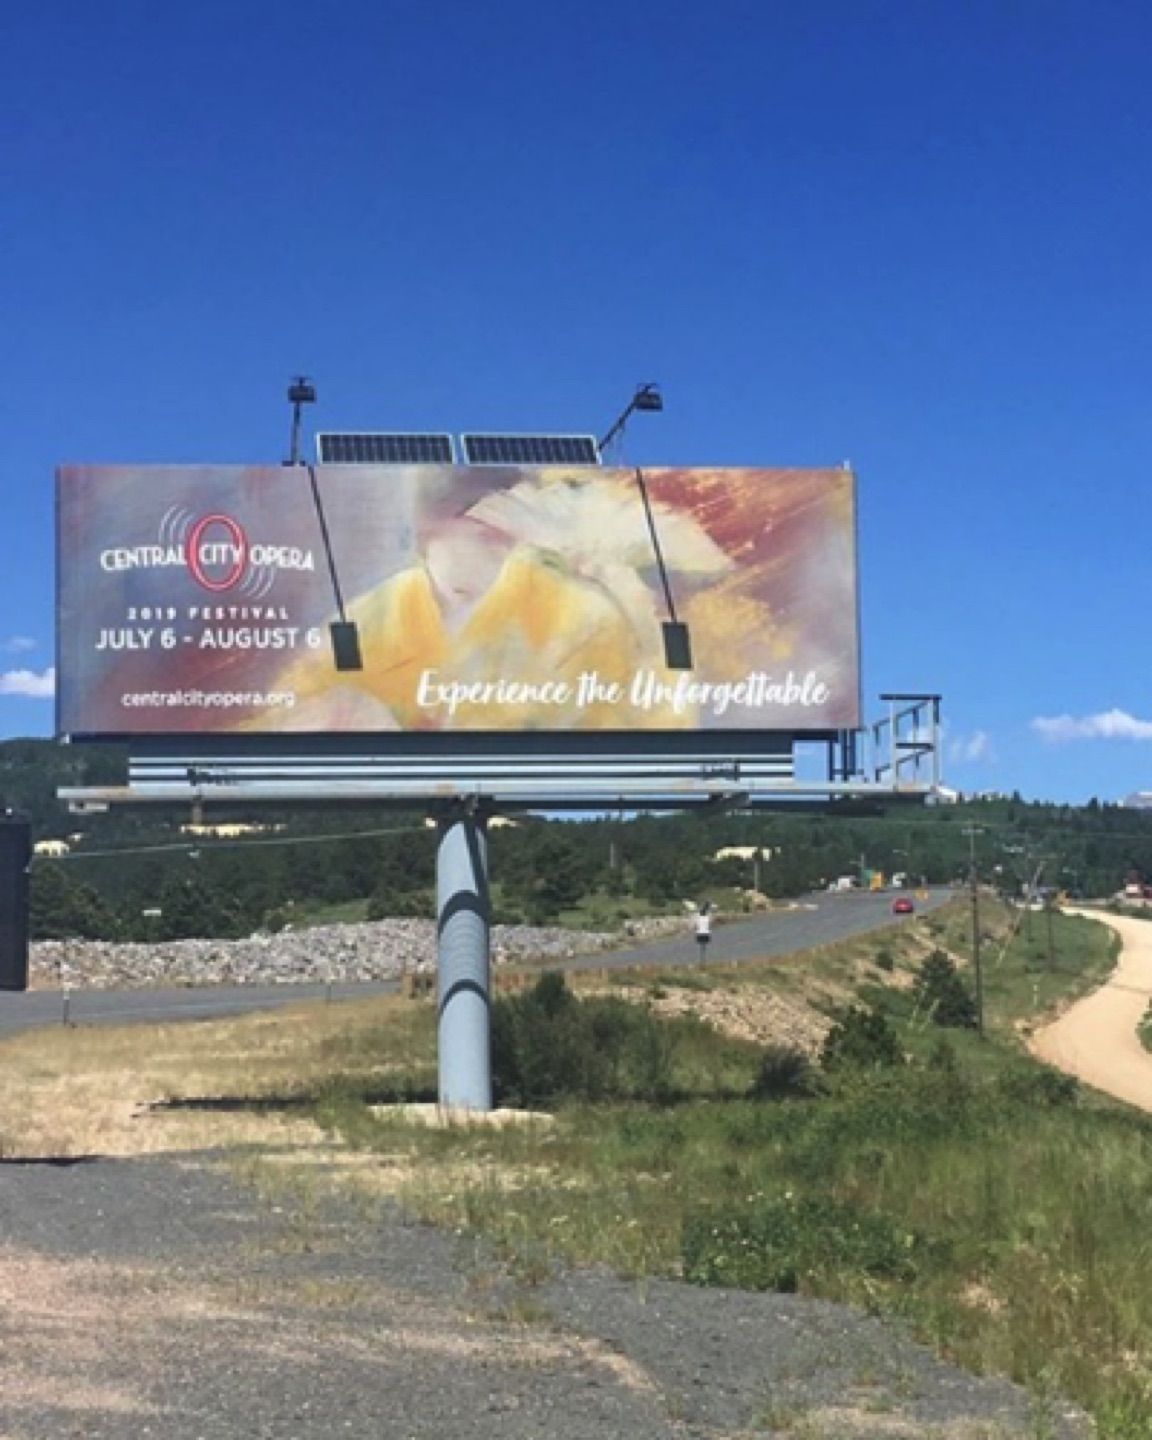 Central City Opera Billboard in the Rocky Mountains 
Featuring Gregg Chadwick's Artwork for Madama Butterfly